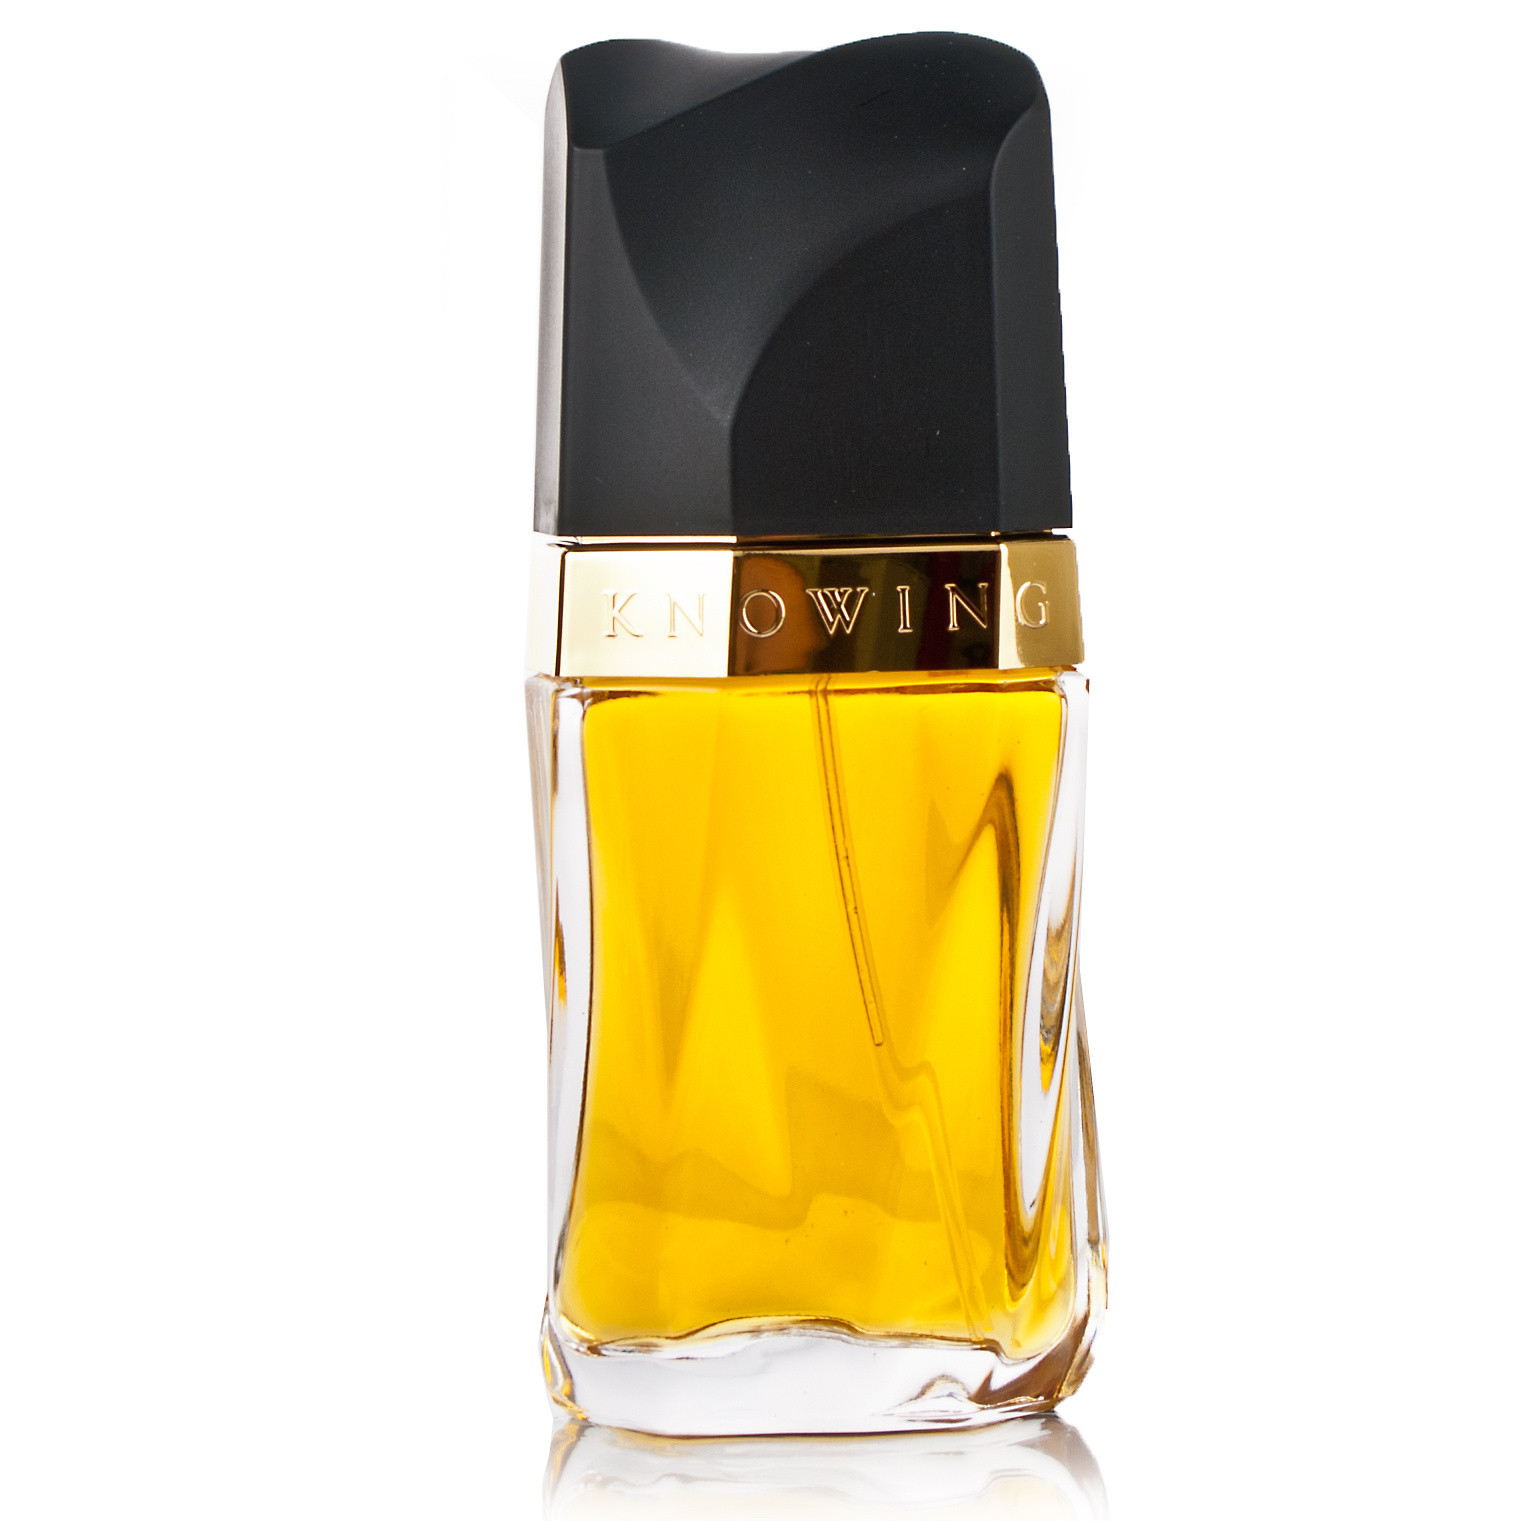 Knowing by Estee Lauder for Women - 1 Ounce EDP Spray, Only $32.23 , free shipping